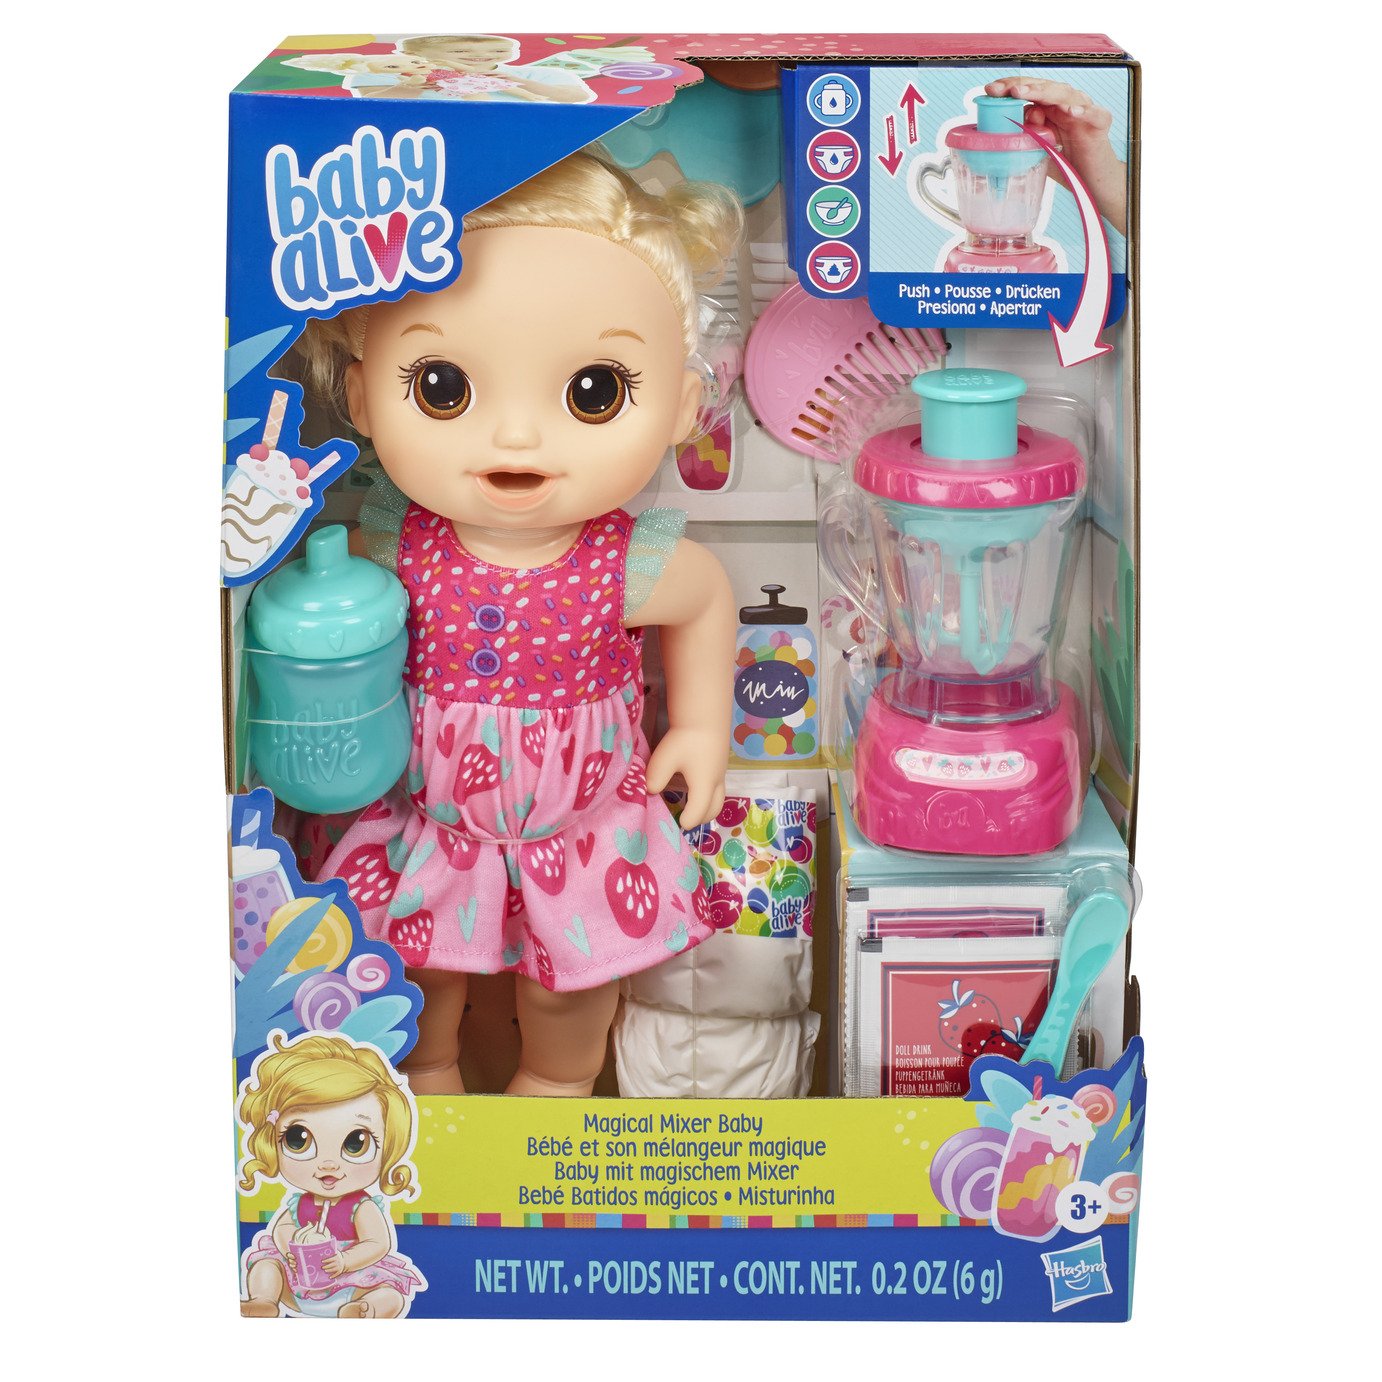 Baby Alive Magical Mixer Baby Doll Review